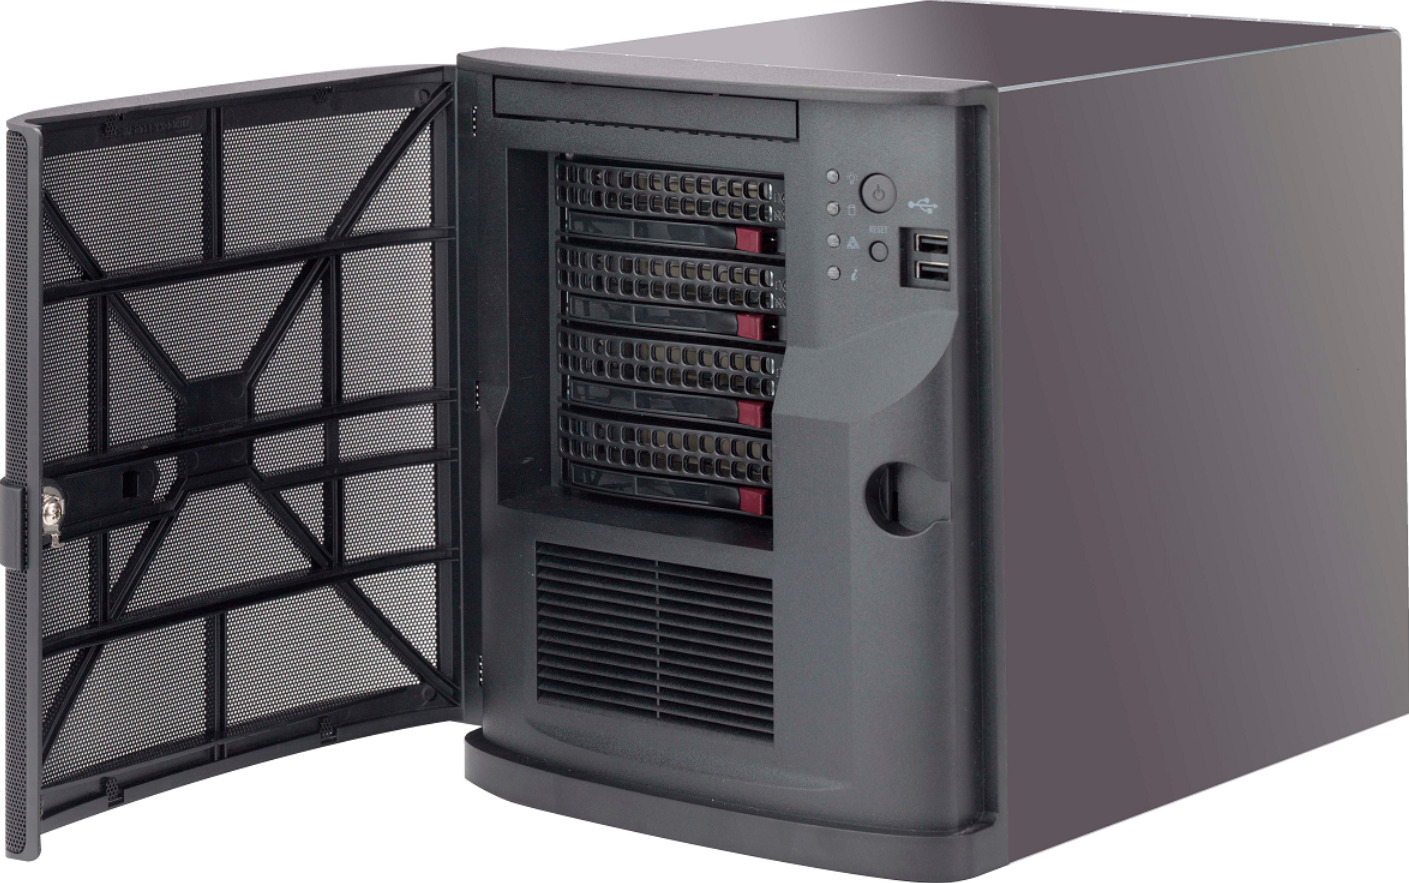 SuperMicro CSE-721TQ-350B2 Mini-tower chassis w/ 4x 3.5 HDD tray, PWS and BPN